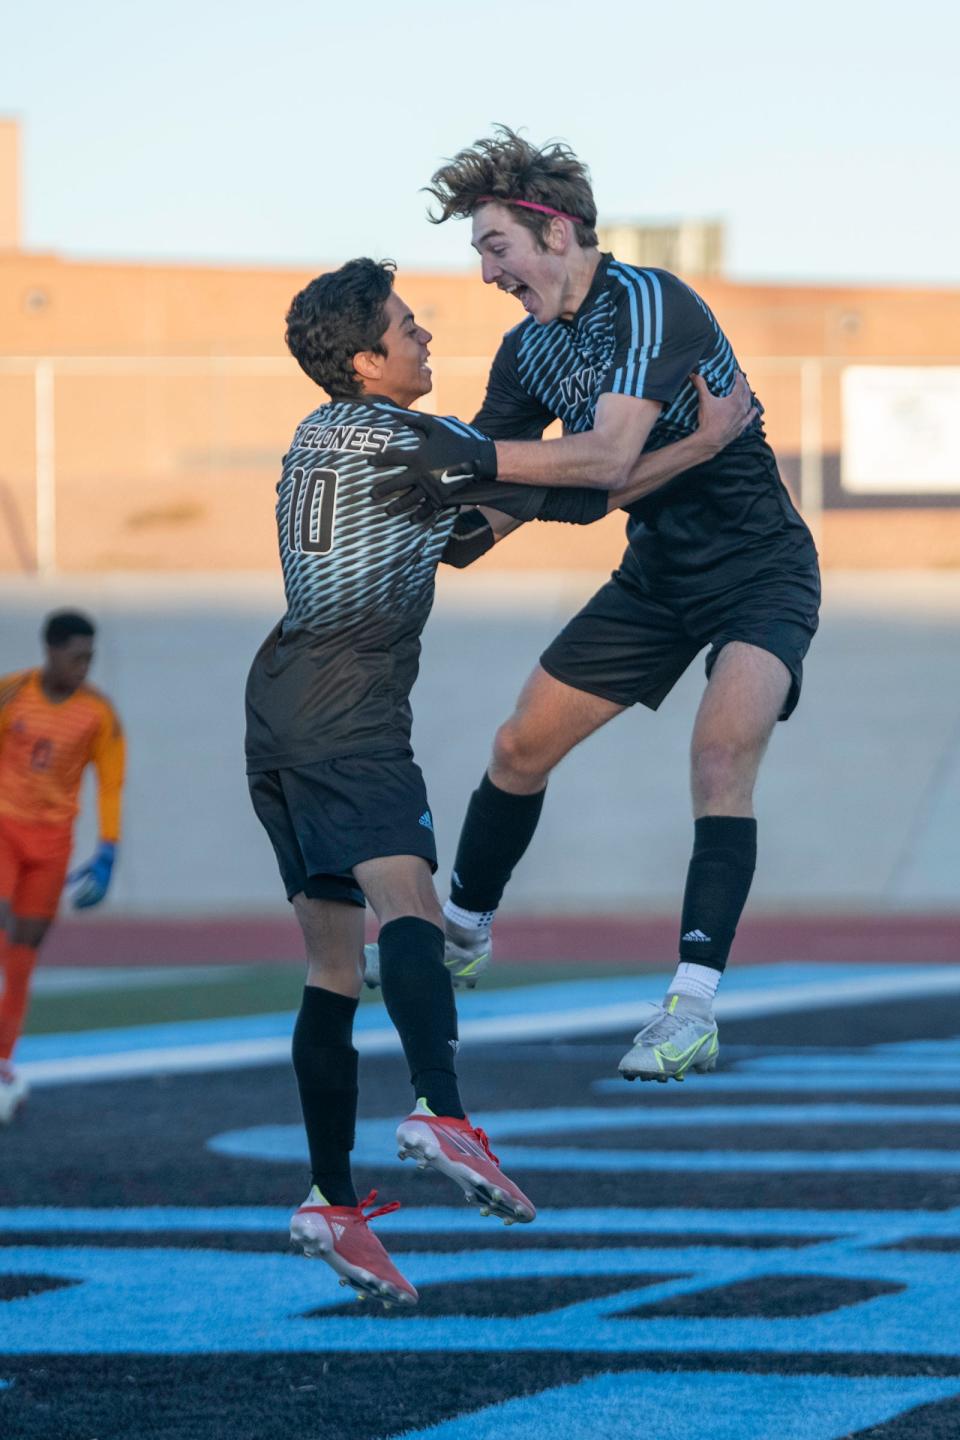 Pueblo West High School's Abram Morales, left, and Bradford Goodrich celebrate after a score during the first round of the Class 4A state boys soccer tournament against Thomas Jefferson on Thursday, October 28, 2021.